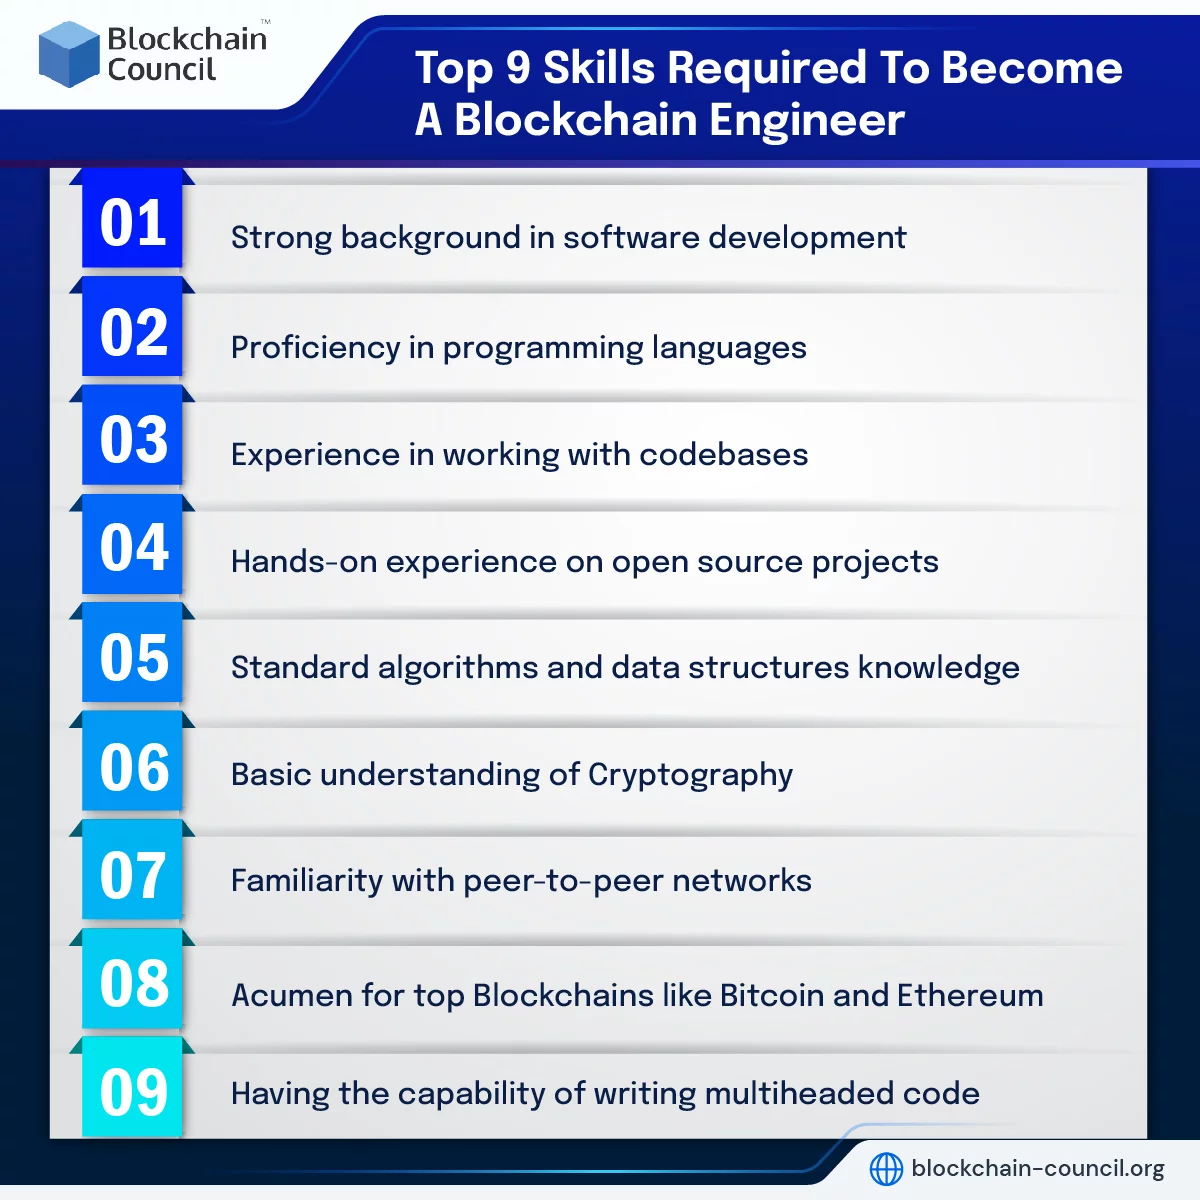 Top 9 Skills Required To Become A Blockchain Engineer